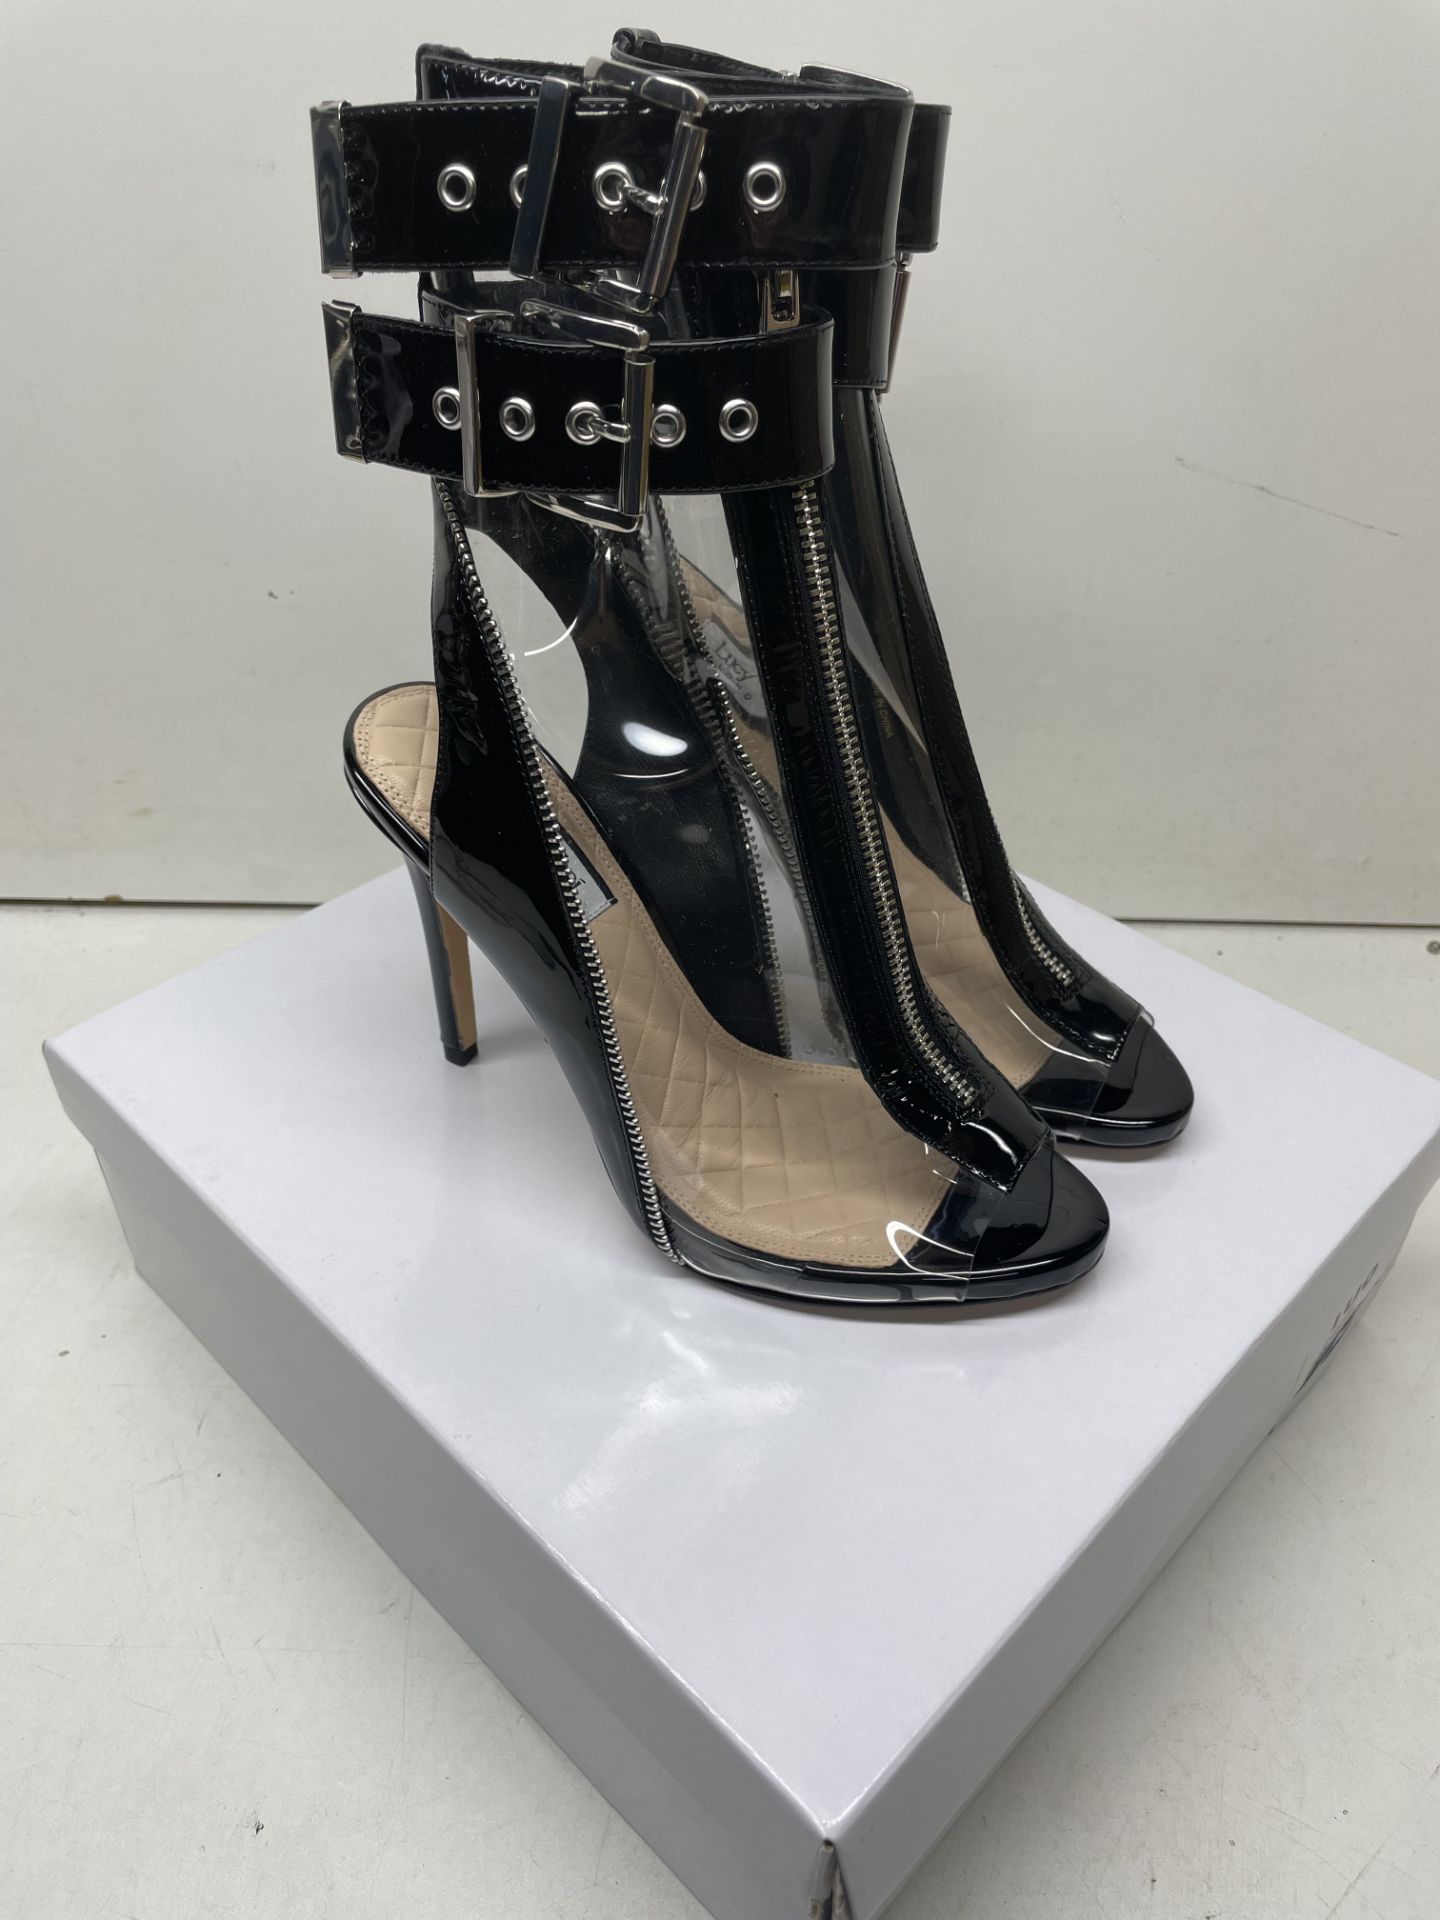 Ex-Display Lucy Choi Stiletto Heel Patent Leather Shoes | Eur 37.5